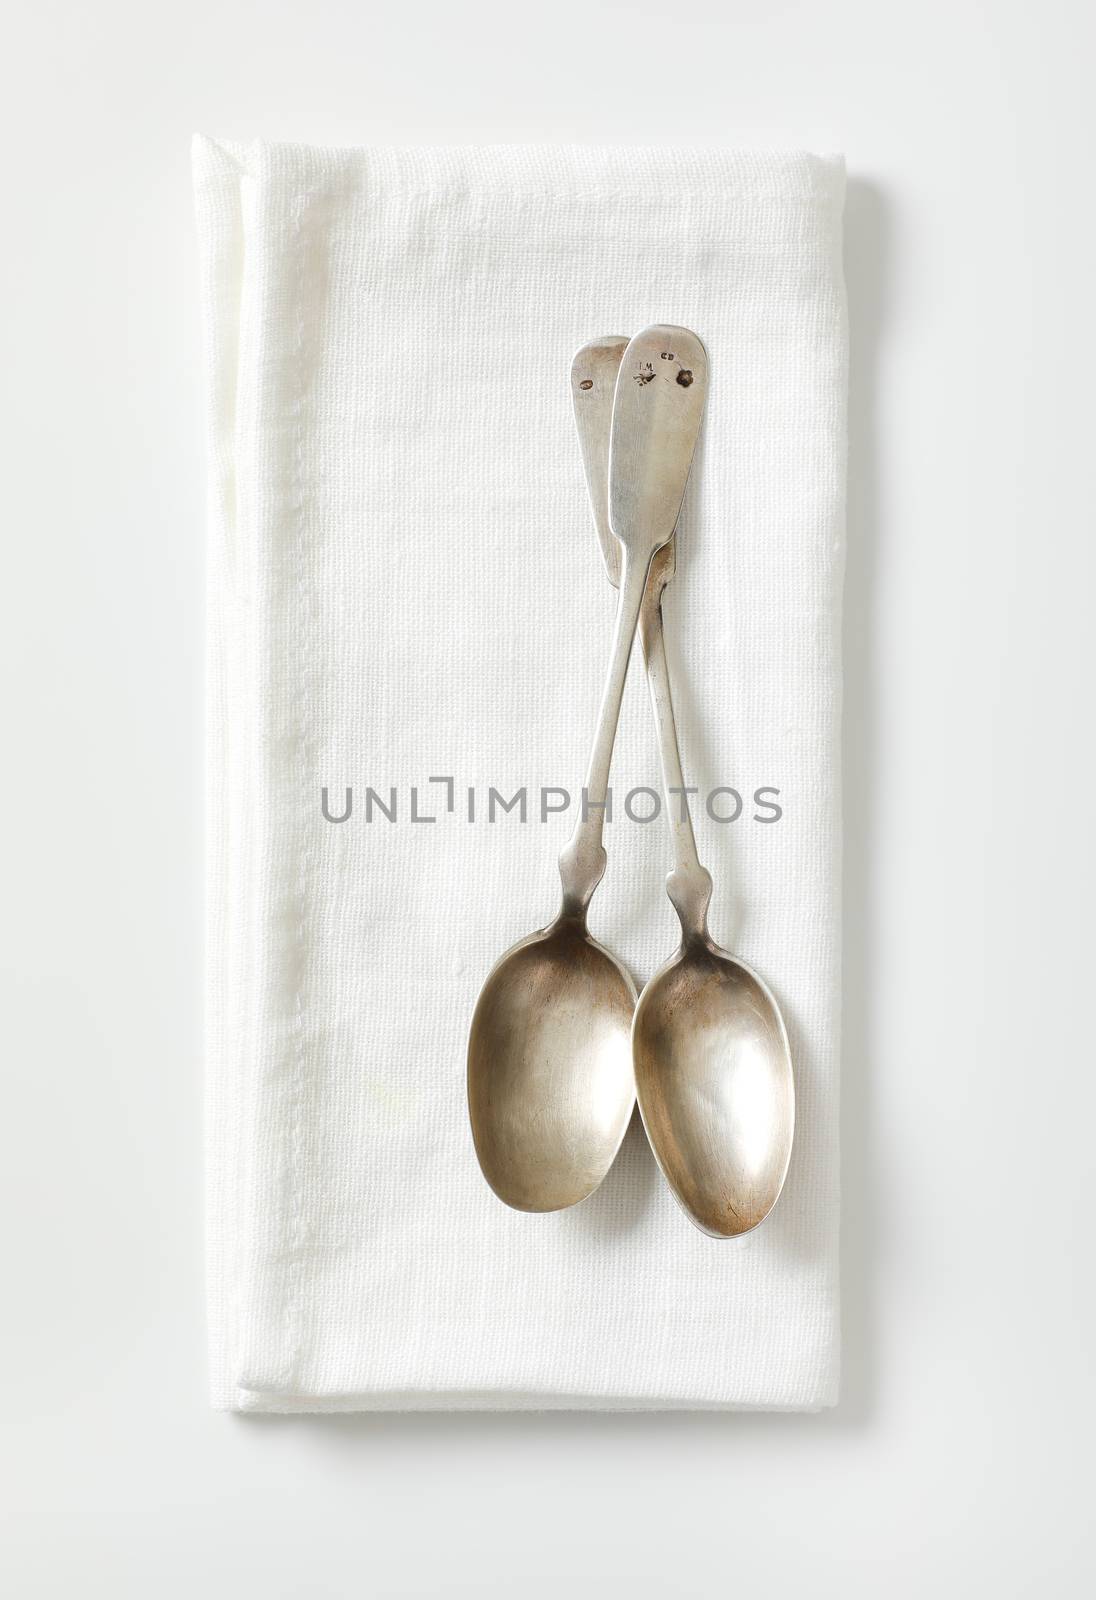 Small vintage coffee or dessert spoons by Digifoodstock